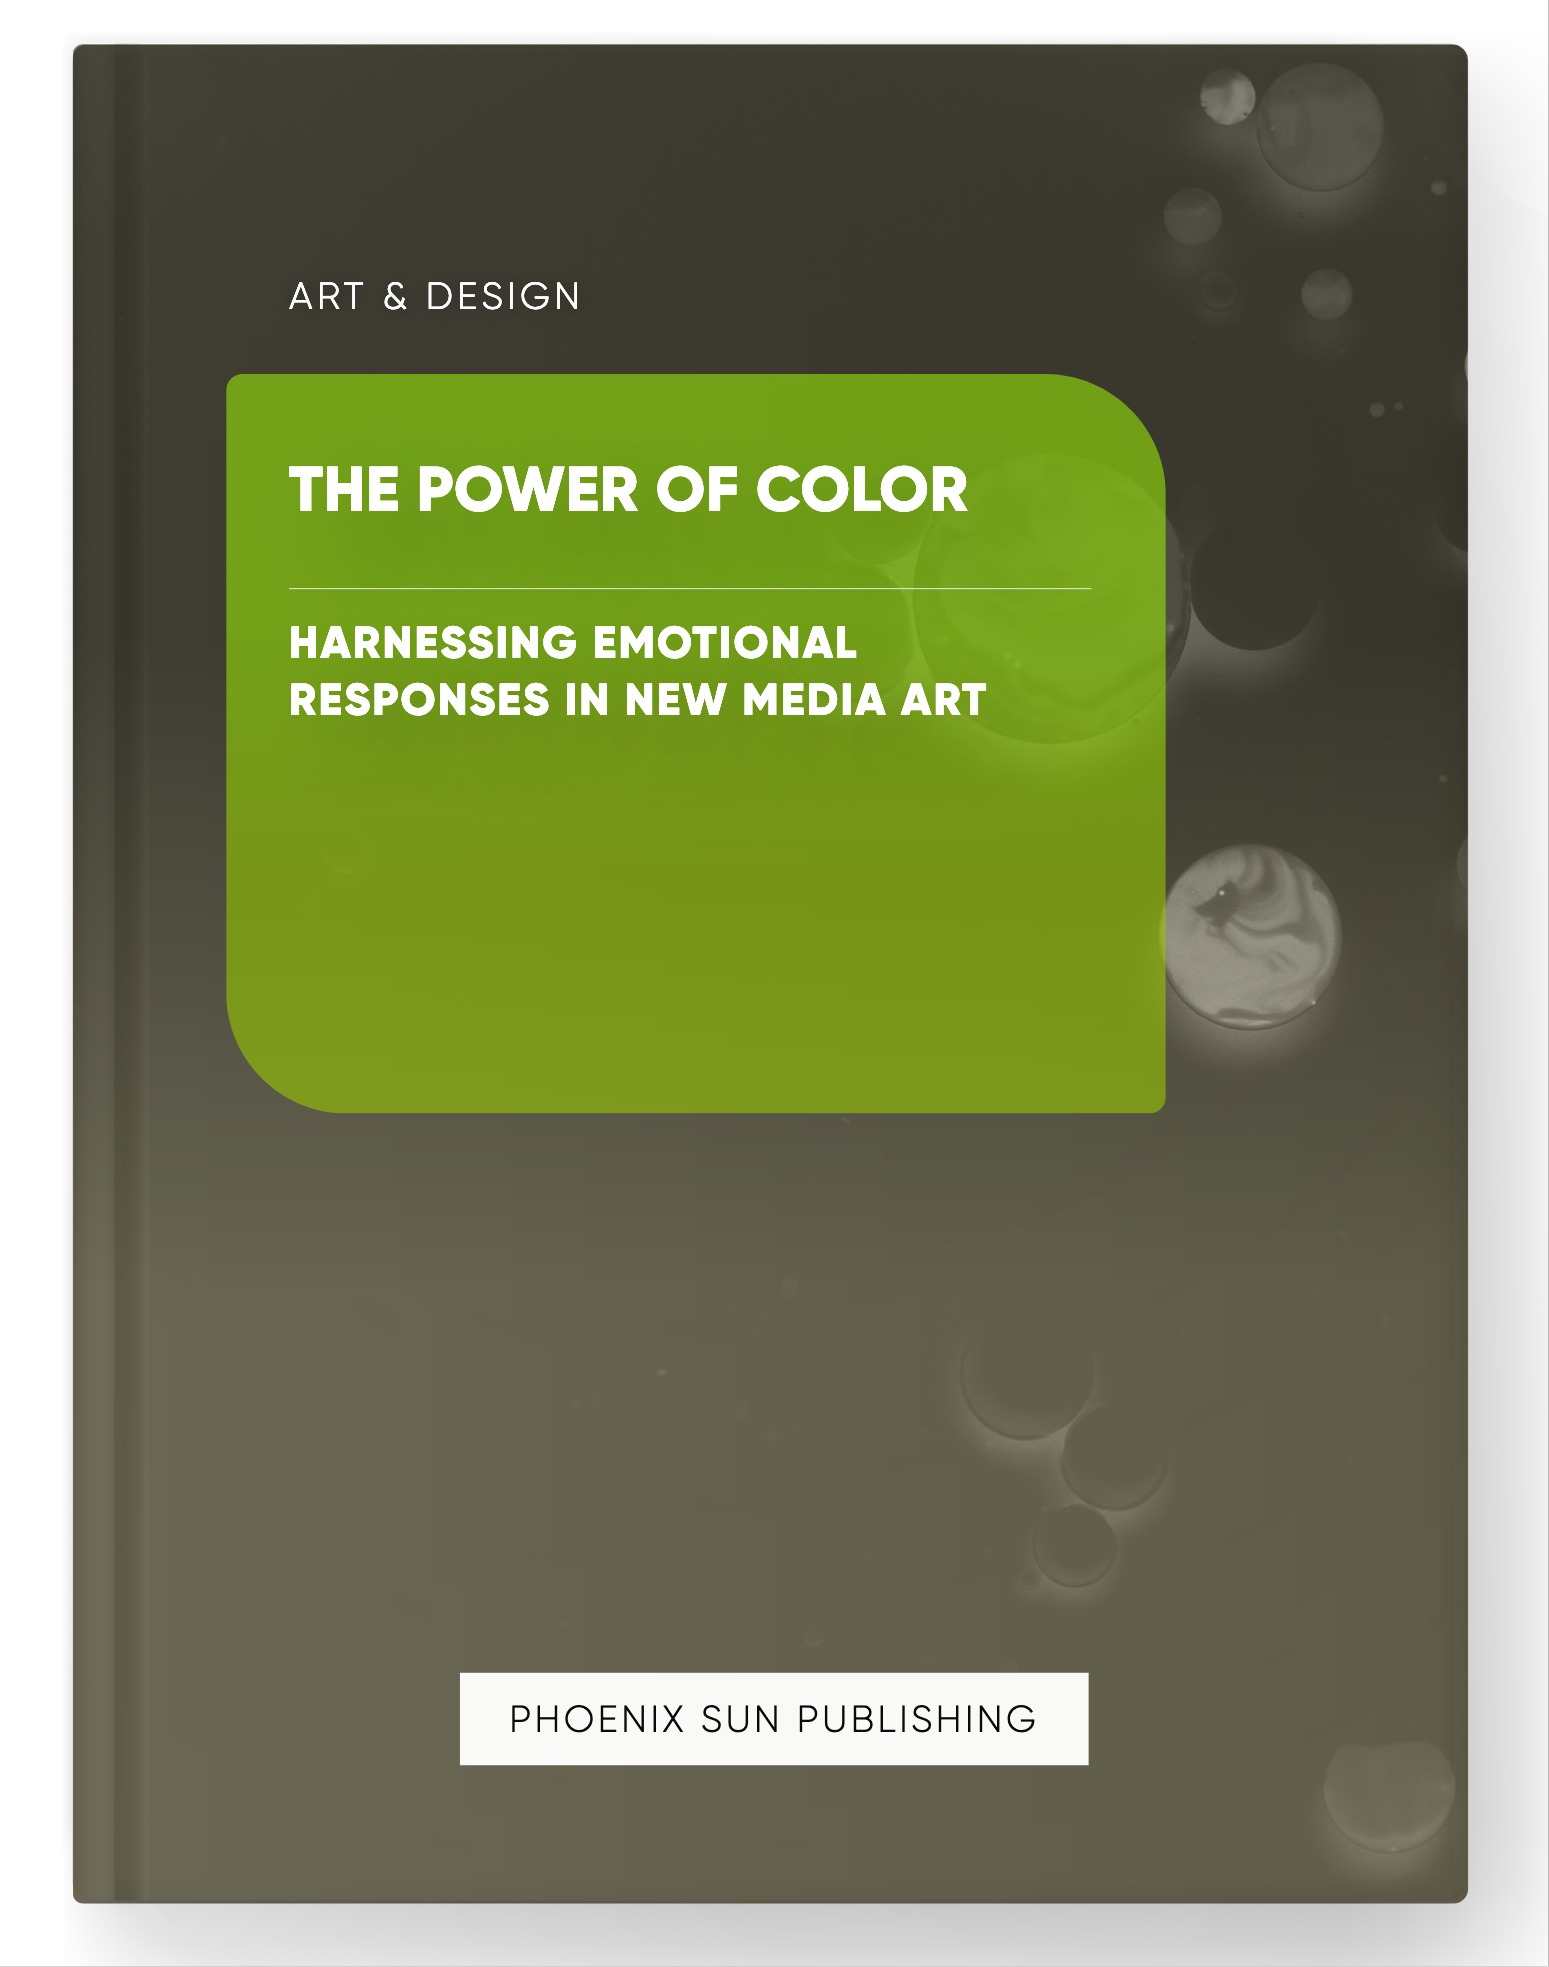 The Power of Color – Harnessing Emotional Responses in New Media Art